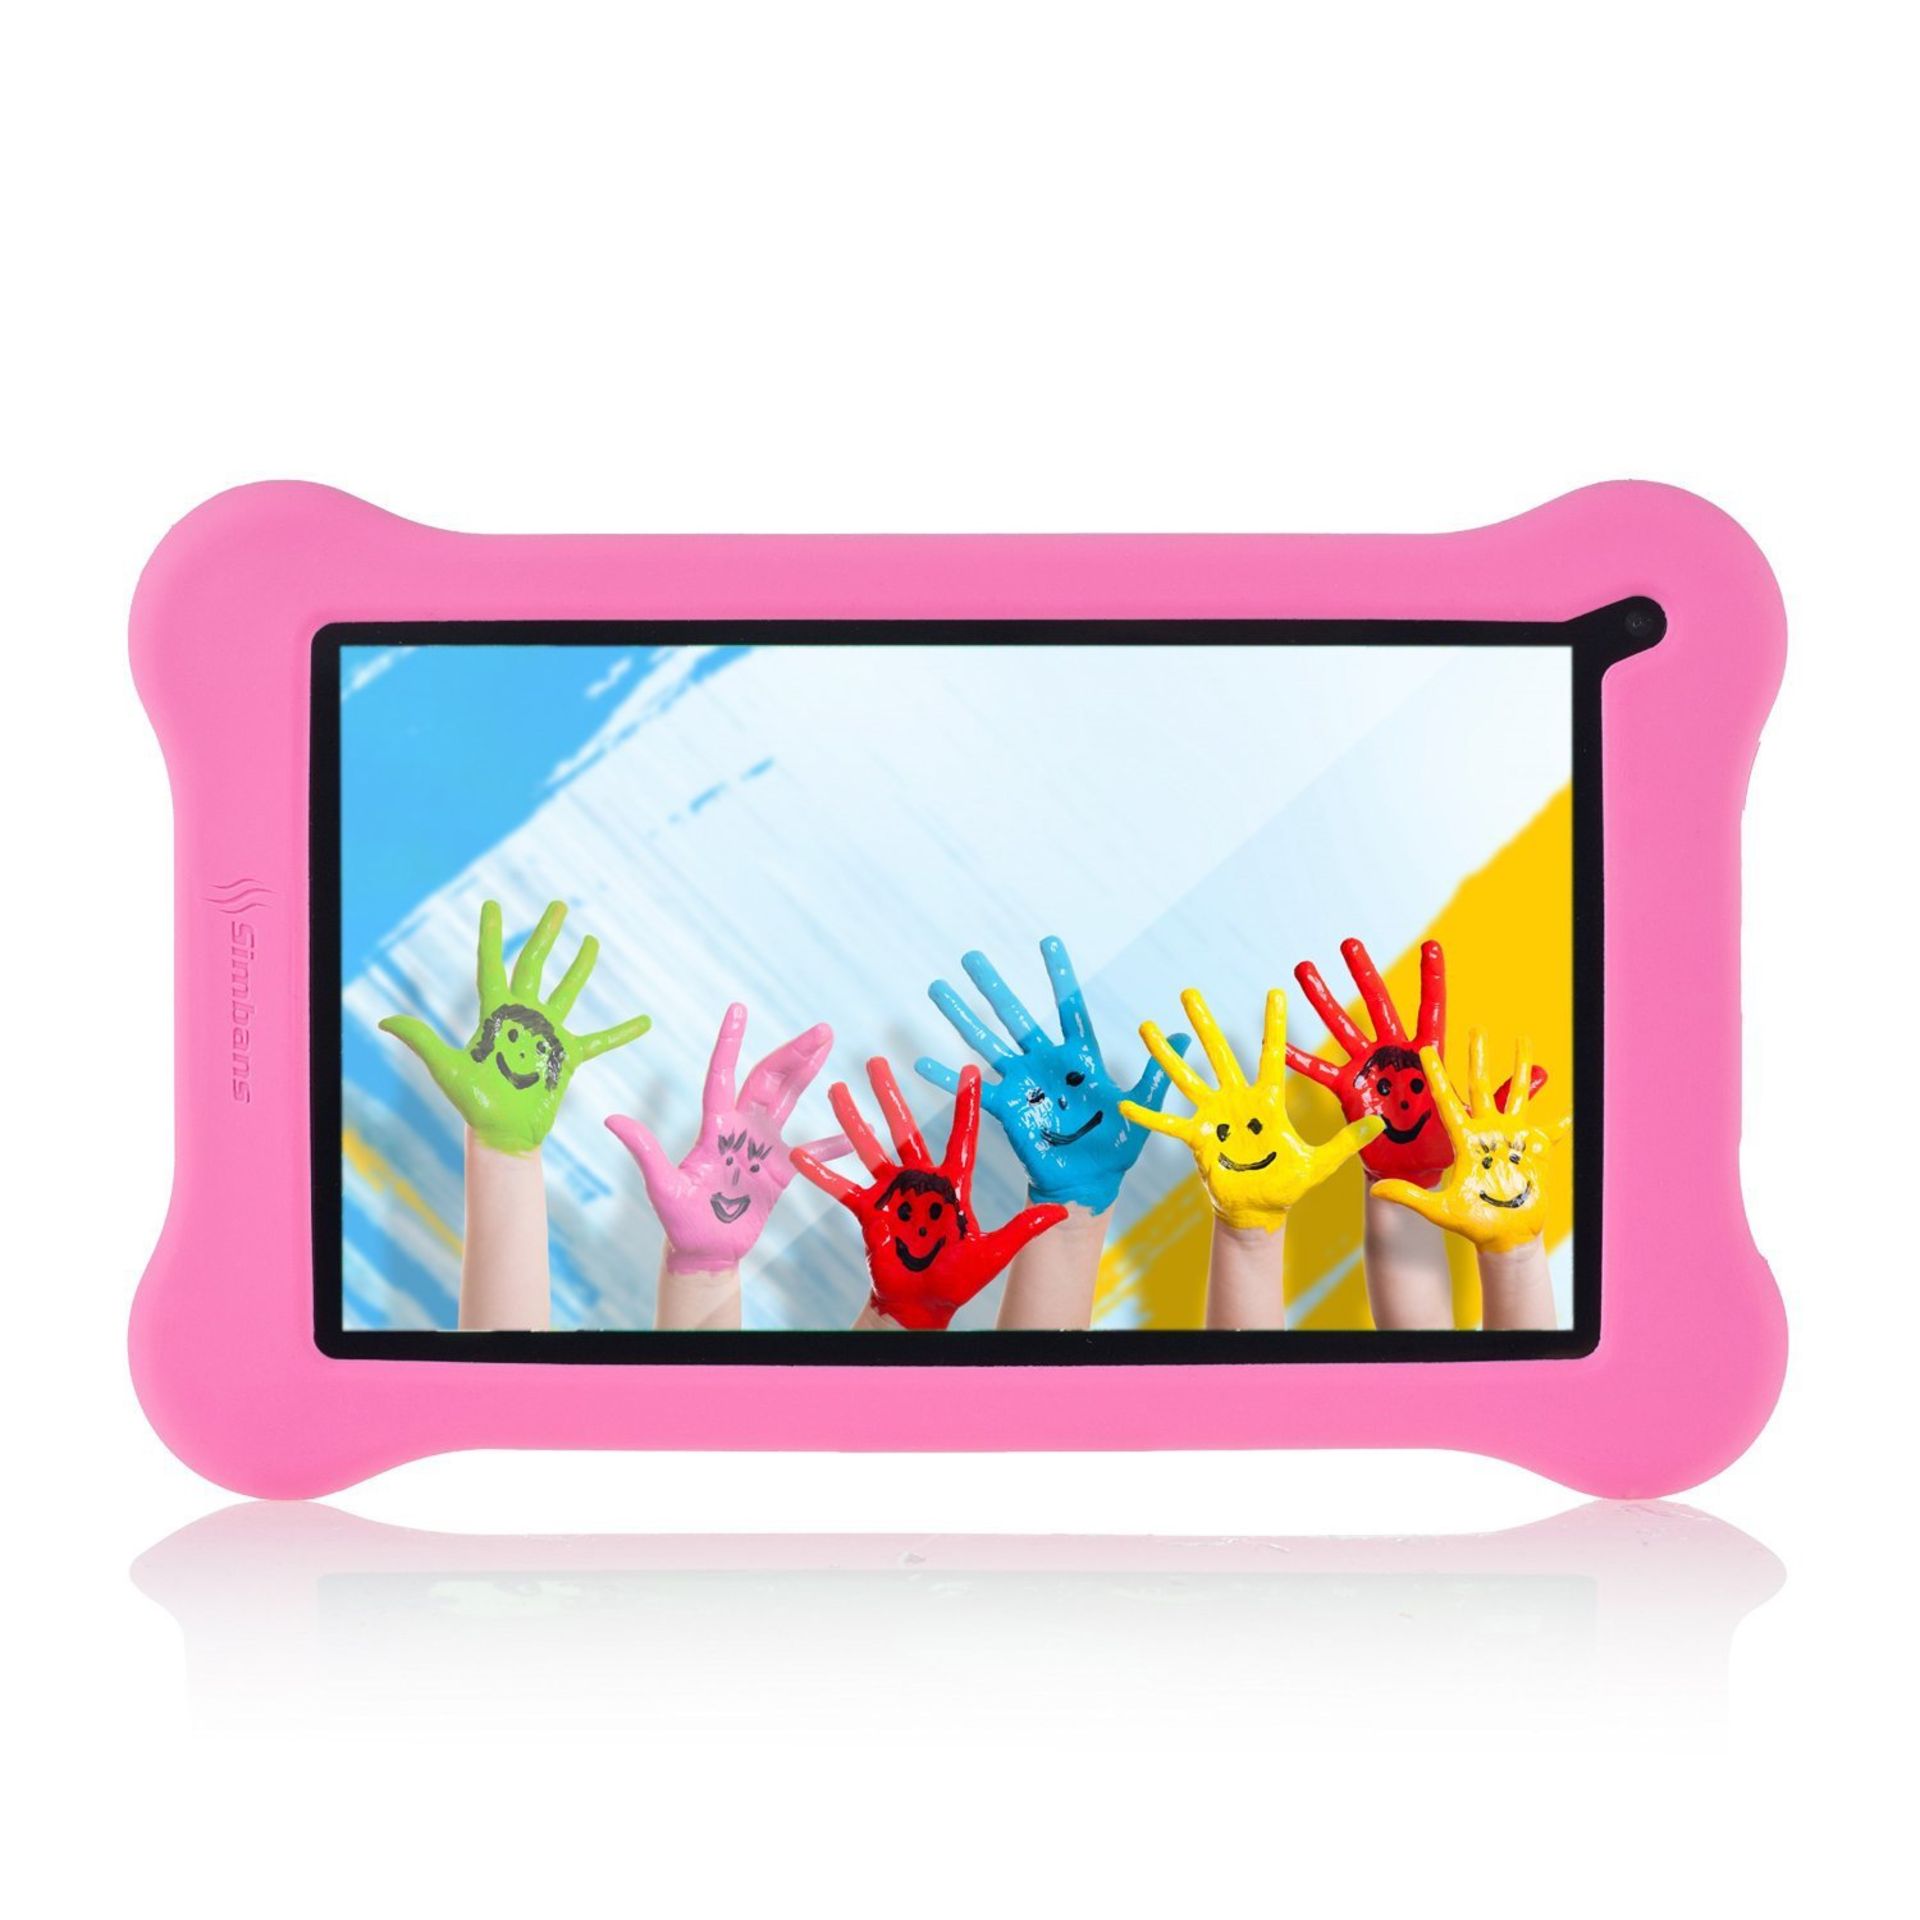 V Grade A Funlet Pink 7 inch Tablet with Protective Case and Tablet Sleeve - IPS Screen - 1GB